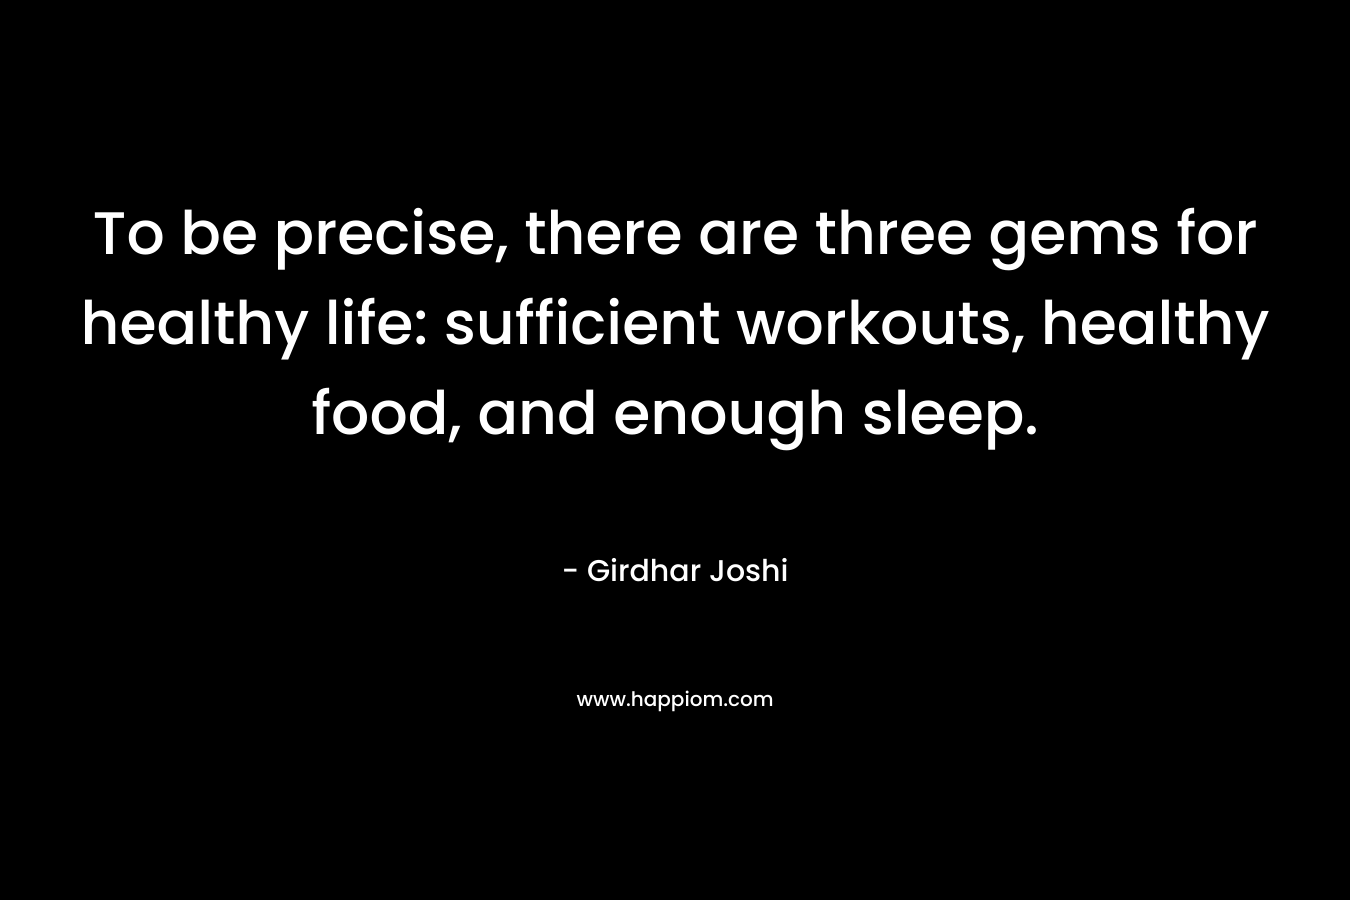 To be precise, there are three gems for healthy life: sufficient workouts, healthy food, and enough sleep. – Girdhar Joshi